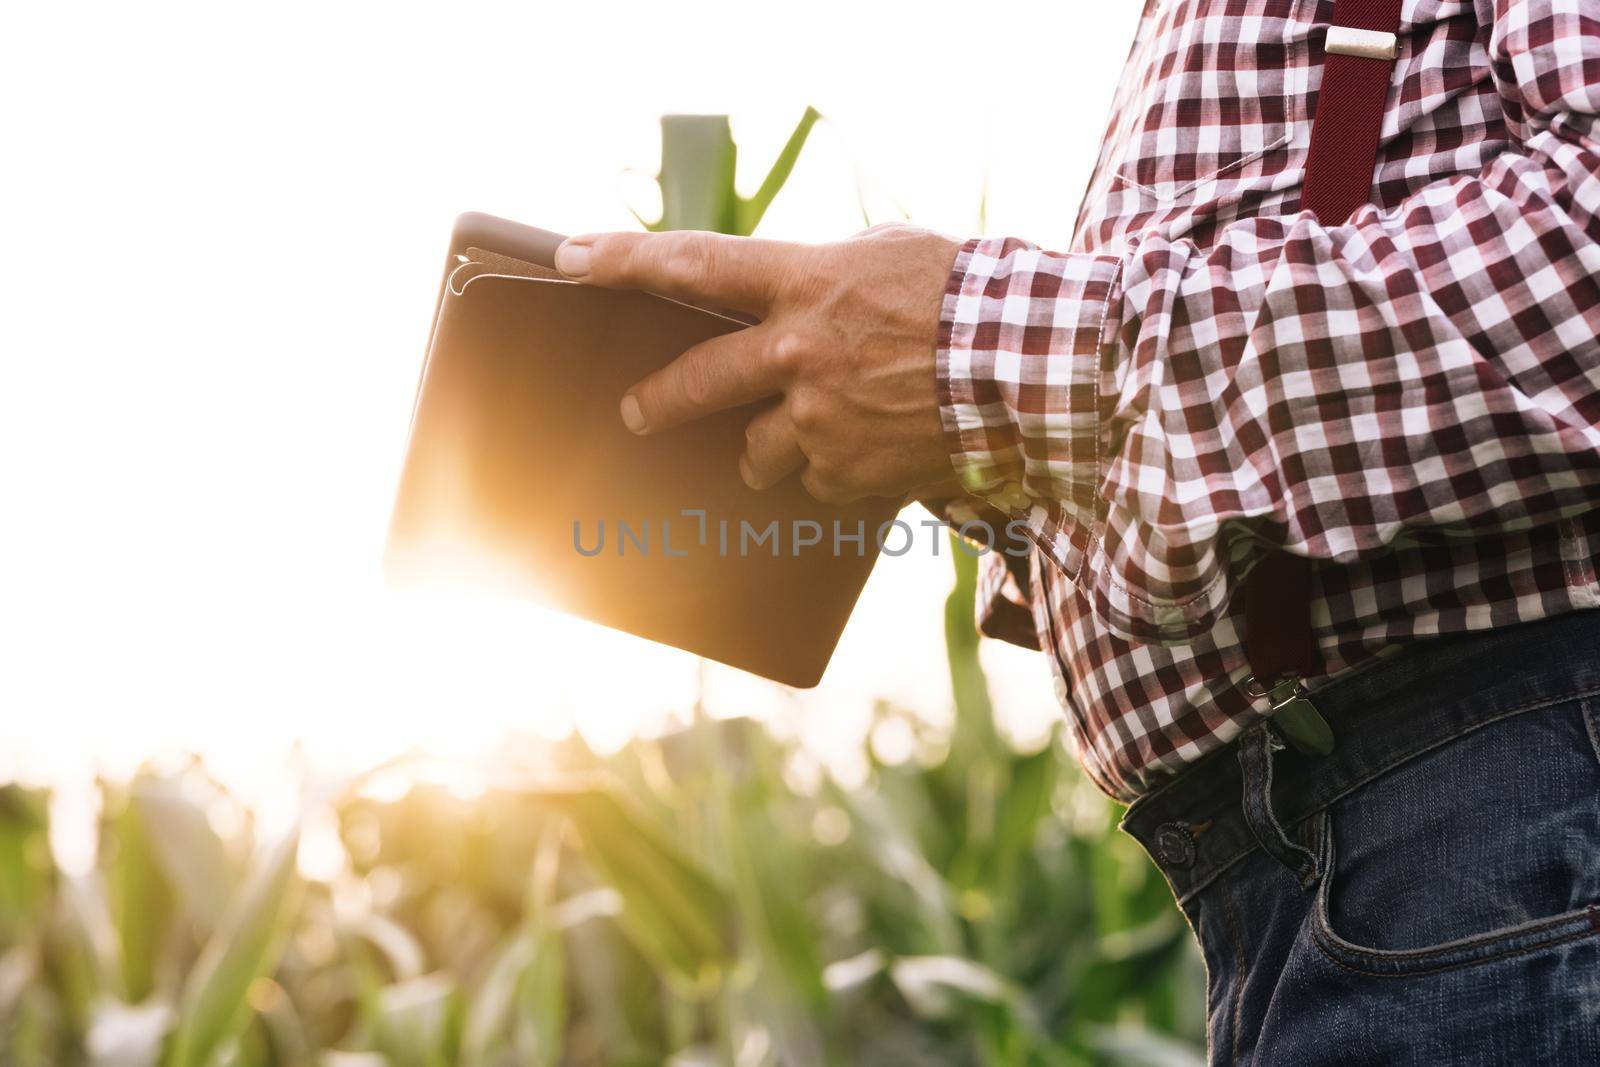 Farmer working in a cornfield, inspecting and tuning irrigation center pivot sprinkler system on tablet. Working in field harvesting crop. Agriculture concept.